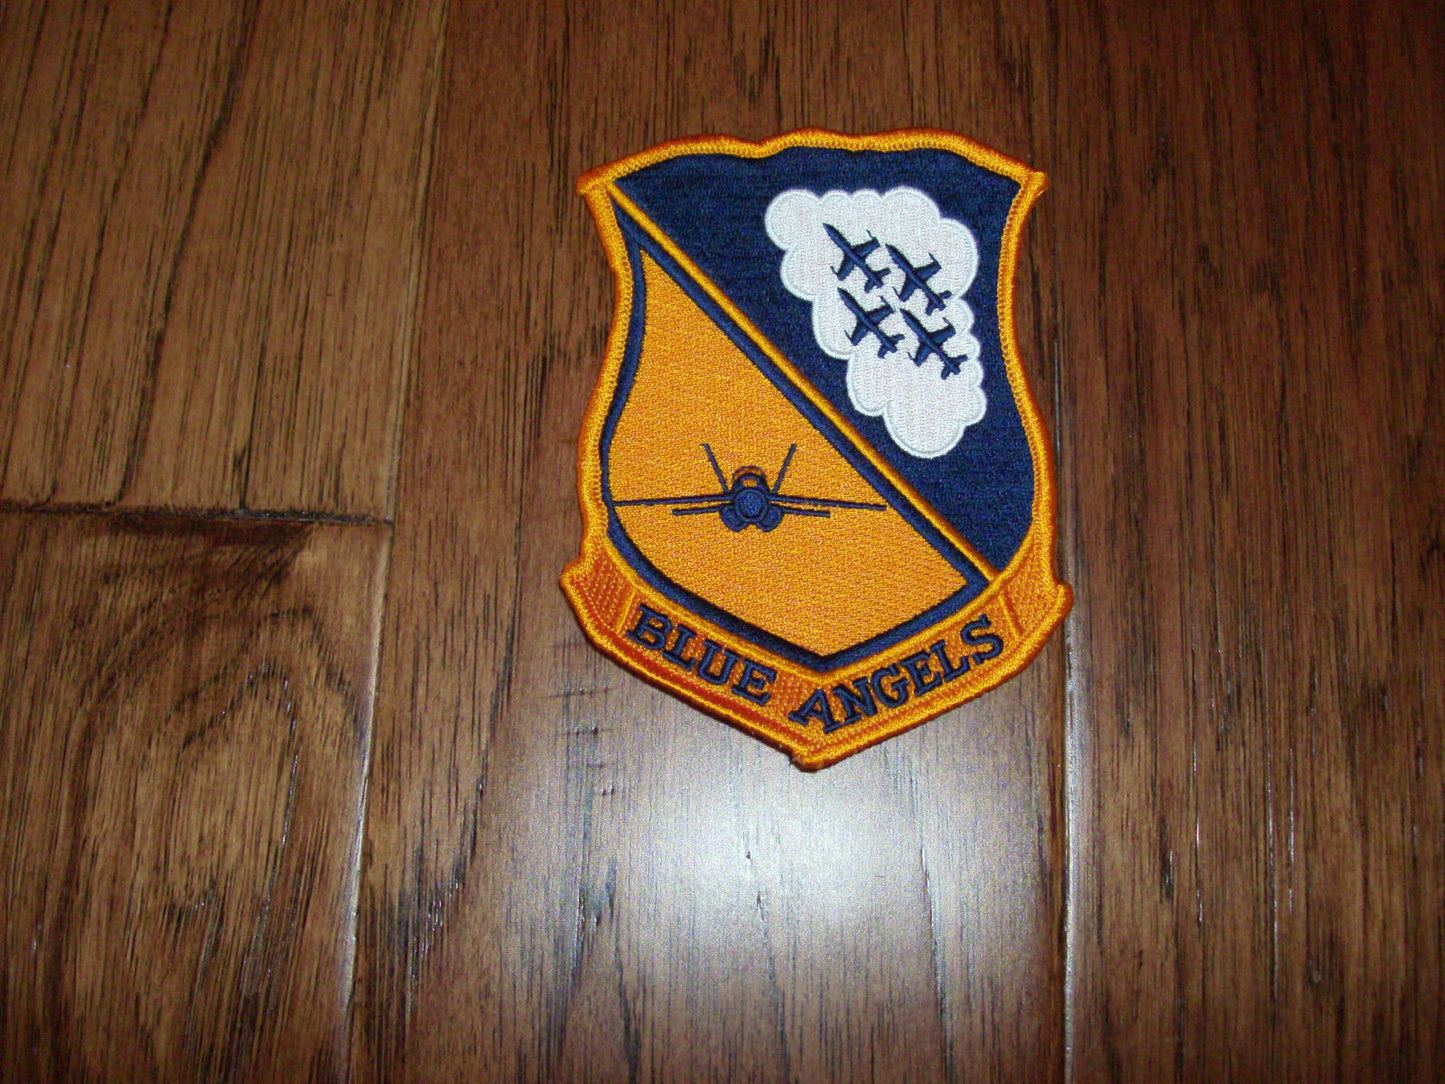 U.S MILITARY NAVY BLUE ANGELS PATCH  5"x 3 1/2" FLIGHT PATCH TOP QUALITY PATCHES